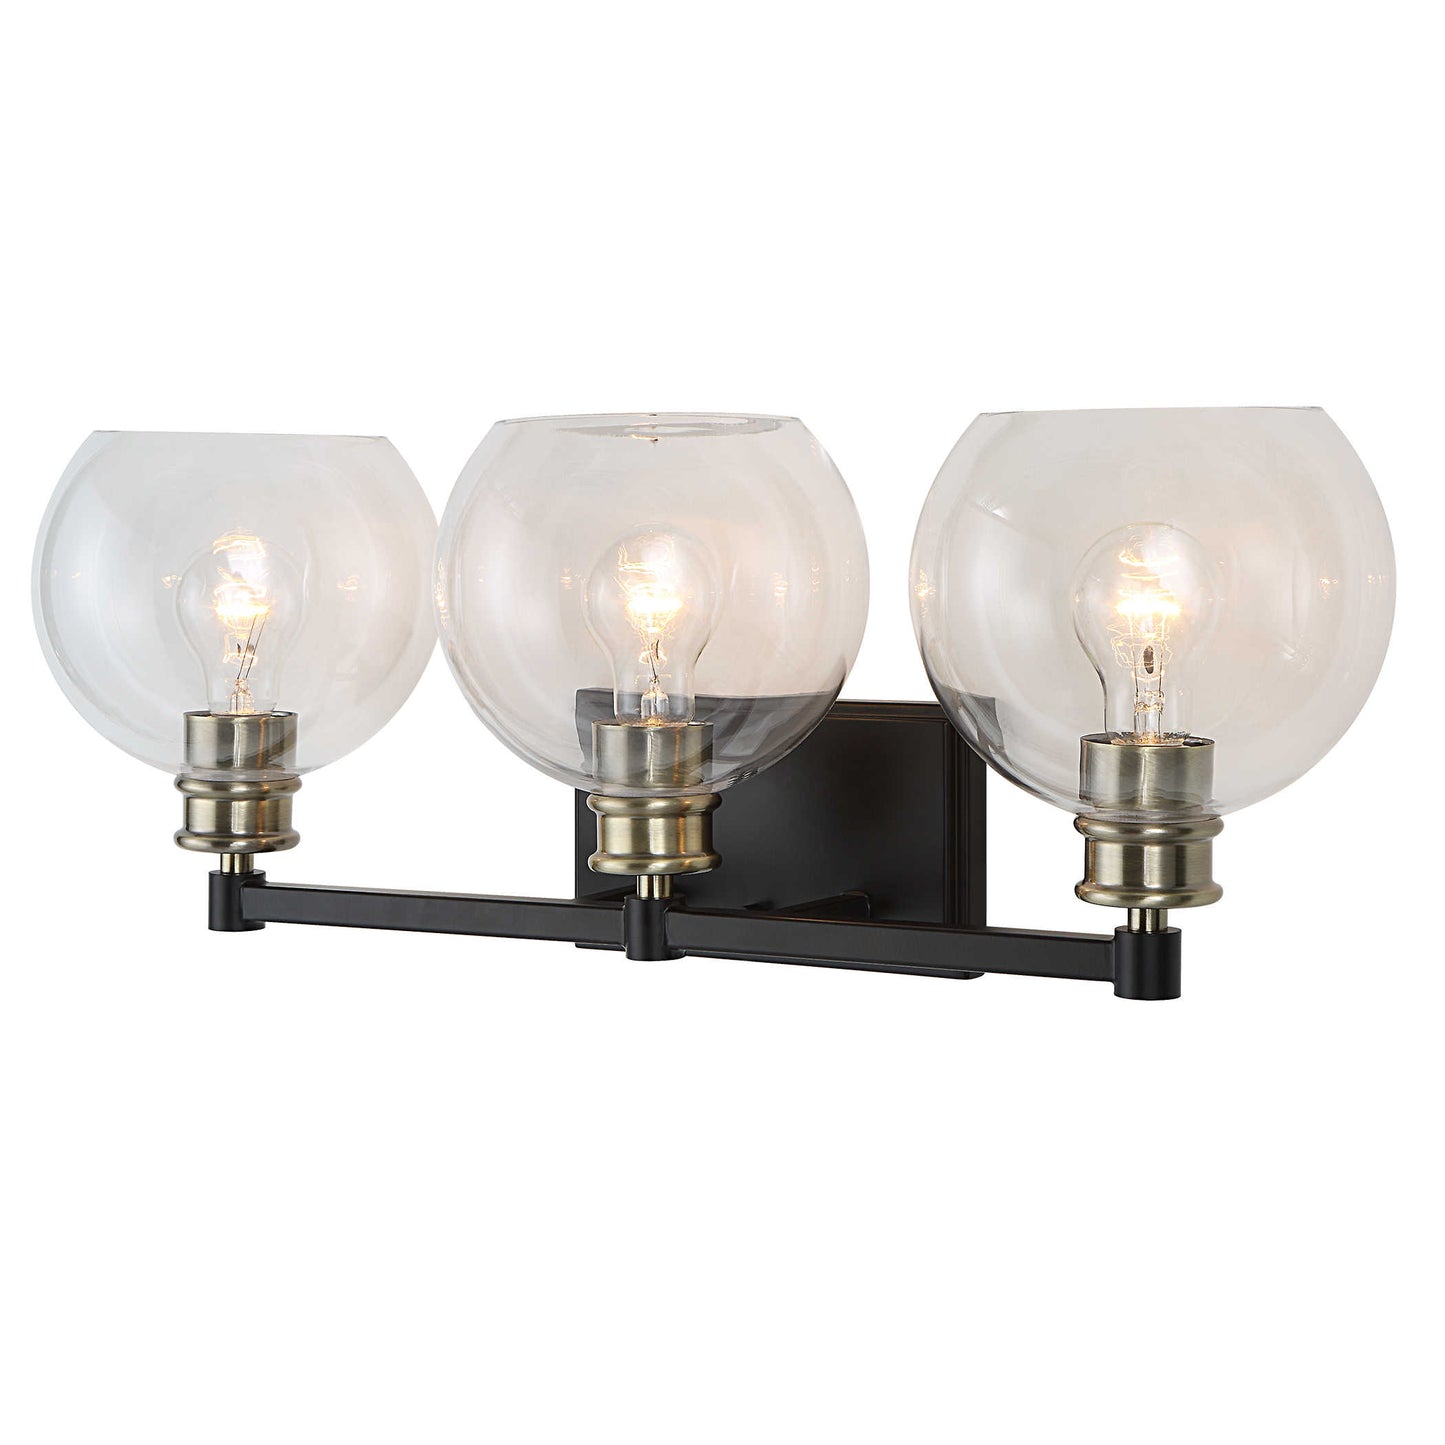 KENT SCONCE LIGHT COLLECTION